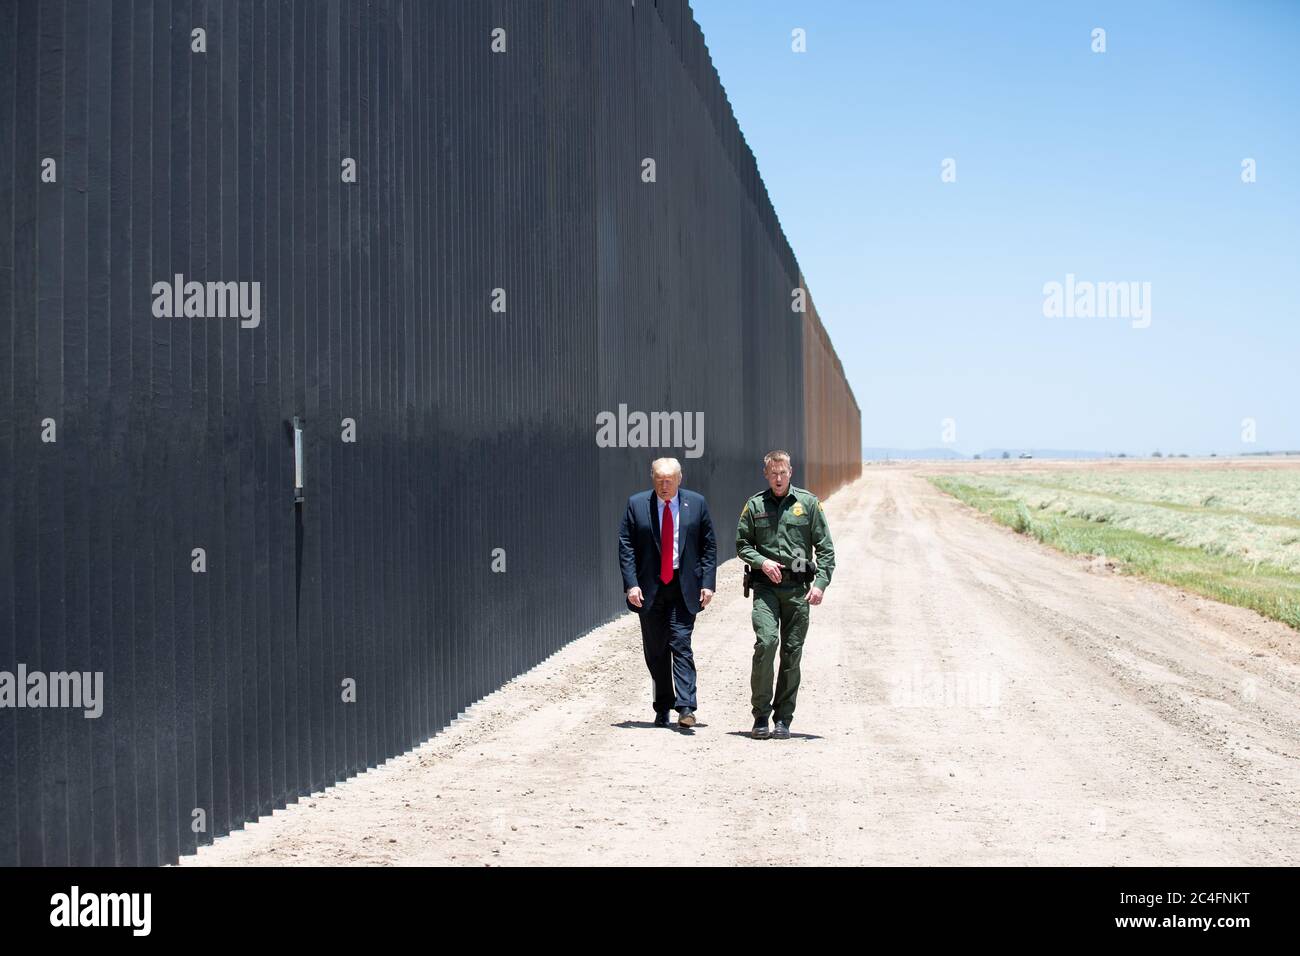 U.S. President Donald Trump is given a tour of a new section of border wall along the Mexican-American border by Border Patrol chief Rodney Scott June 23, 2020 in San Luis, Arizona. The visit marked the completion of 200 miles of border wall, the majority of which is replacement for existing structure at a cost of $20-million dollars a mile. Stock Photo